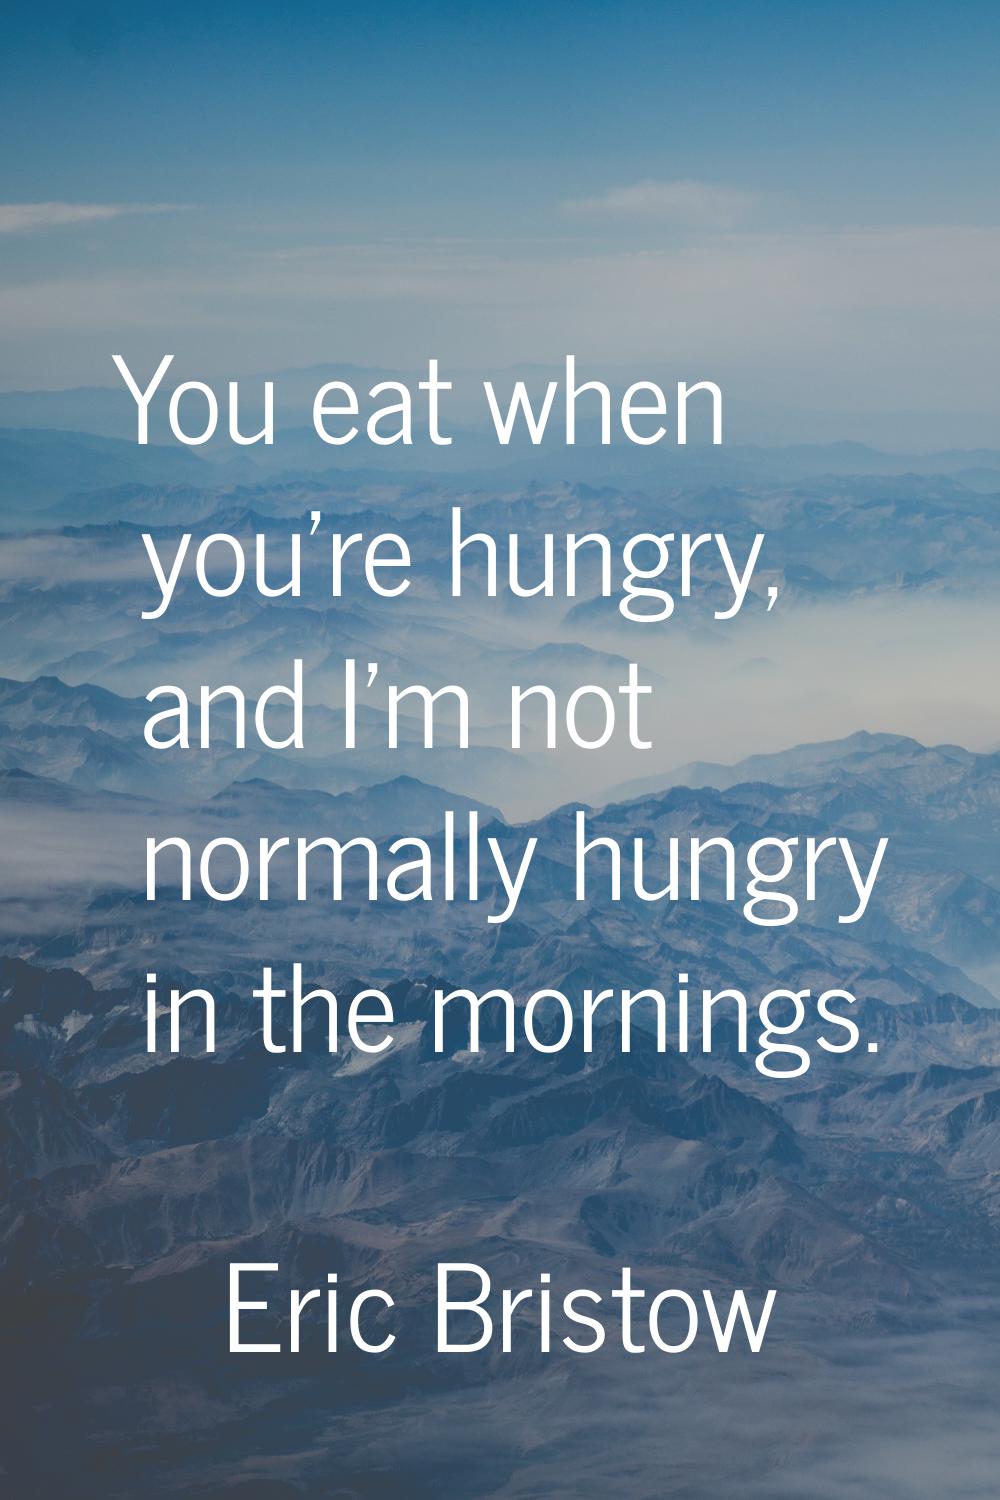 You eat when you're hungry, and I'm not normally hungry in the mornings.